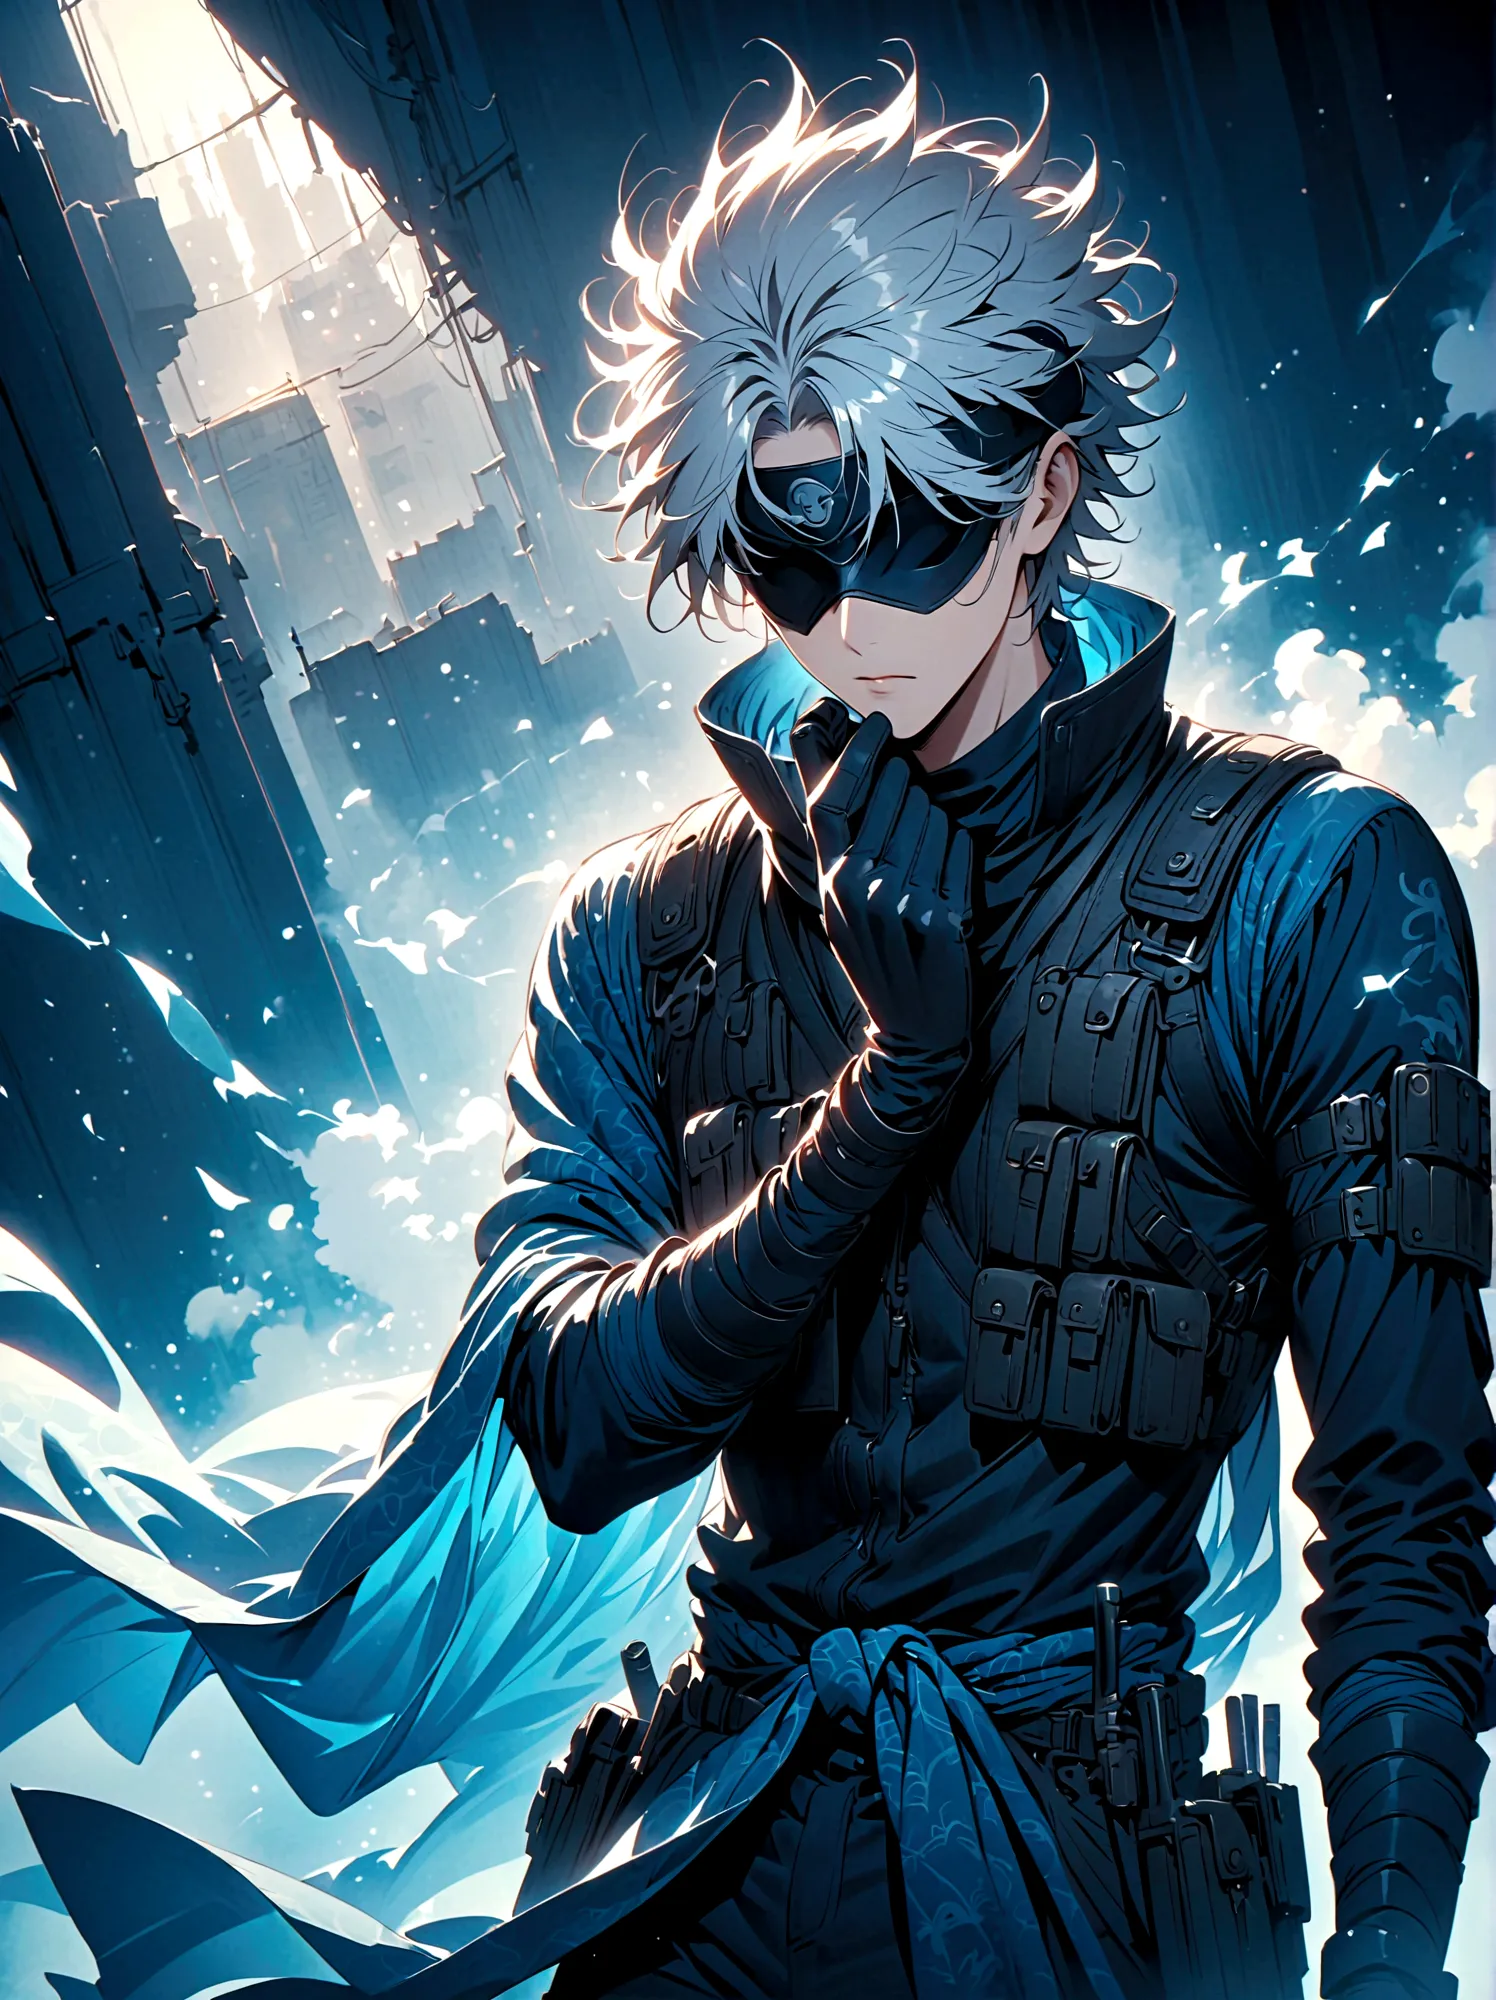 A fictional anime character sporting a silver spiky hair, wearing a headband tilted to cover one eye. He is dressed in a typical...